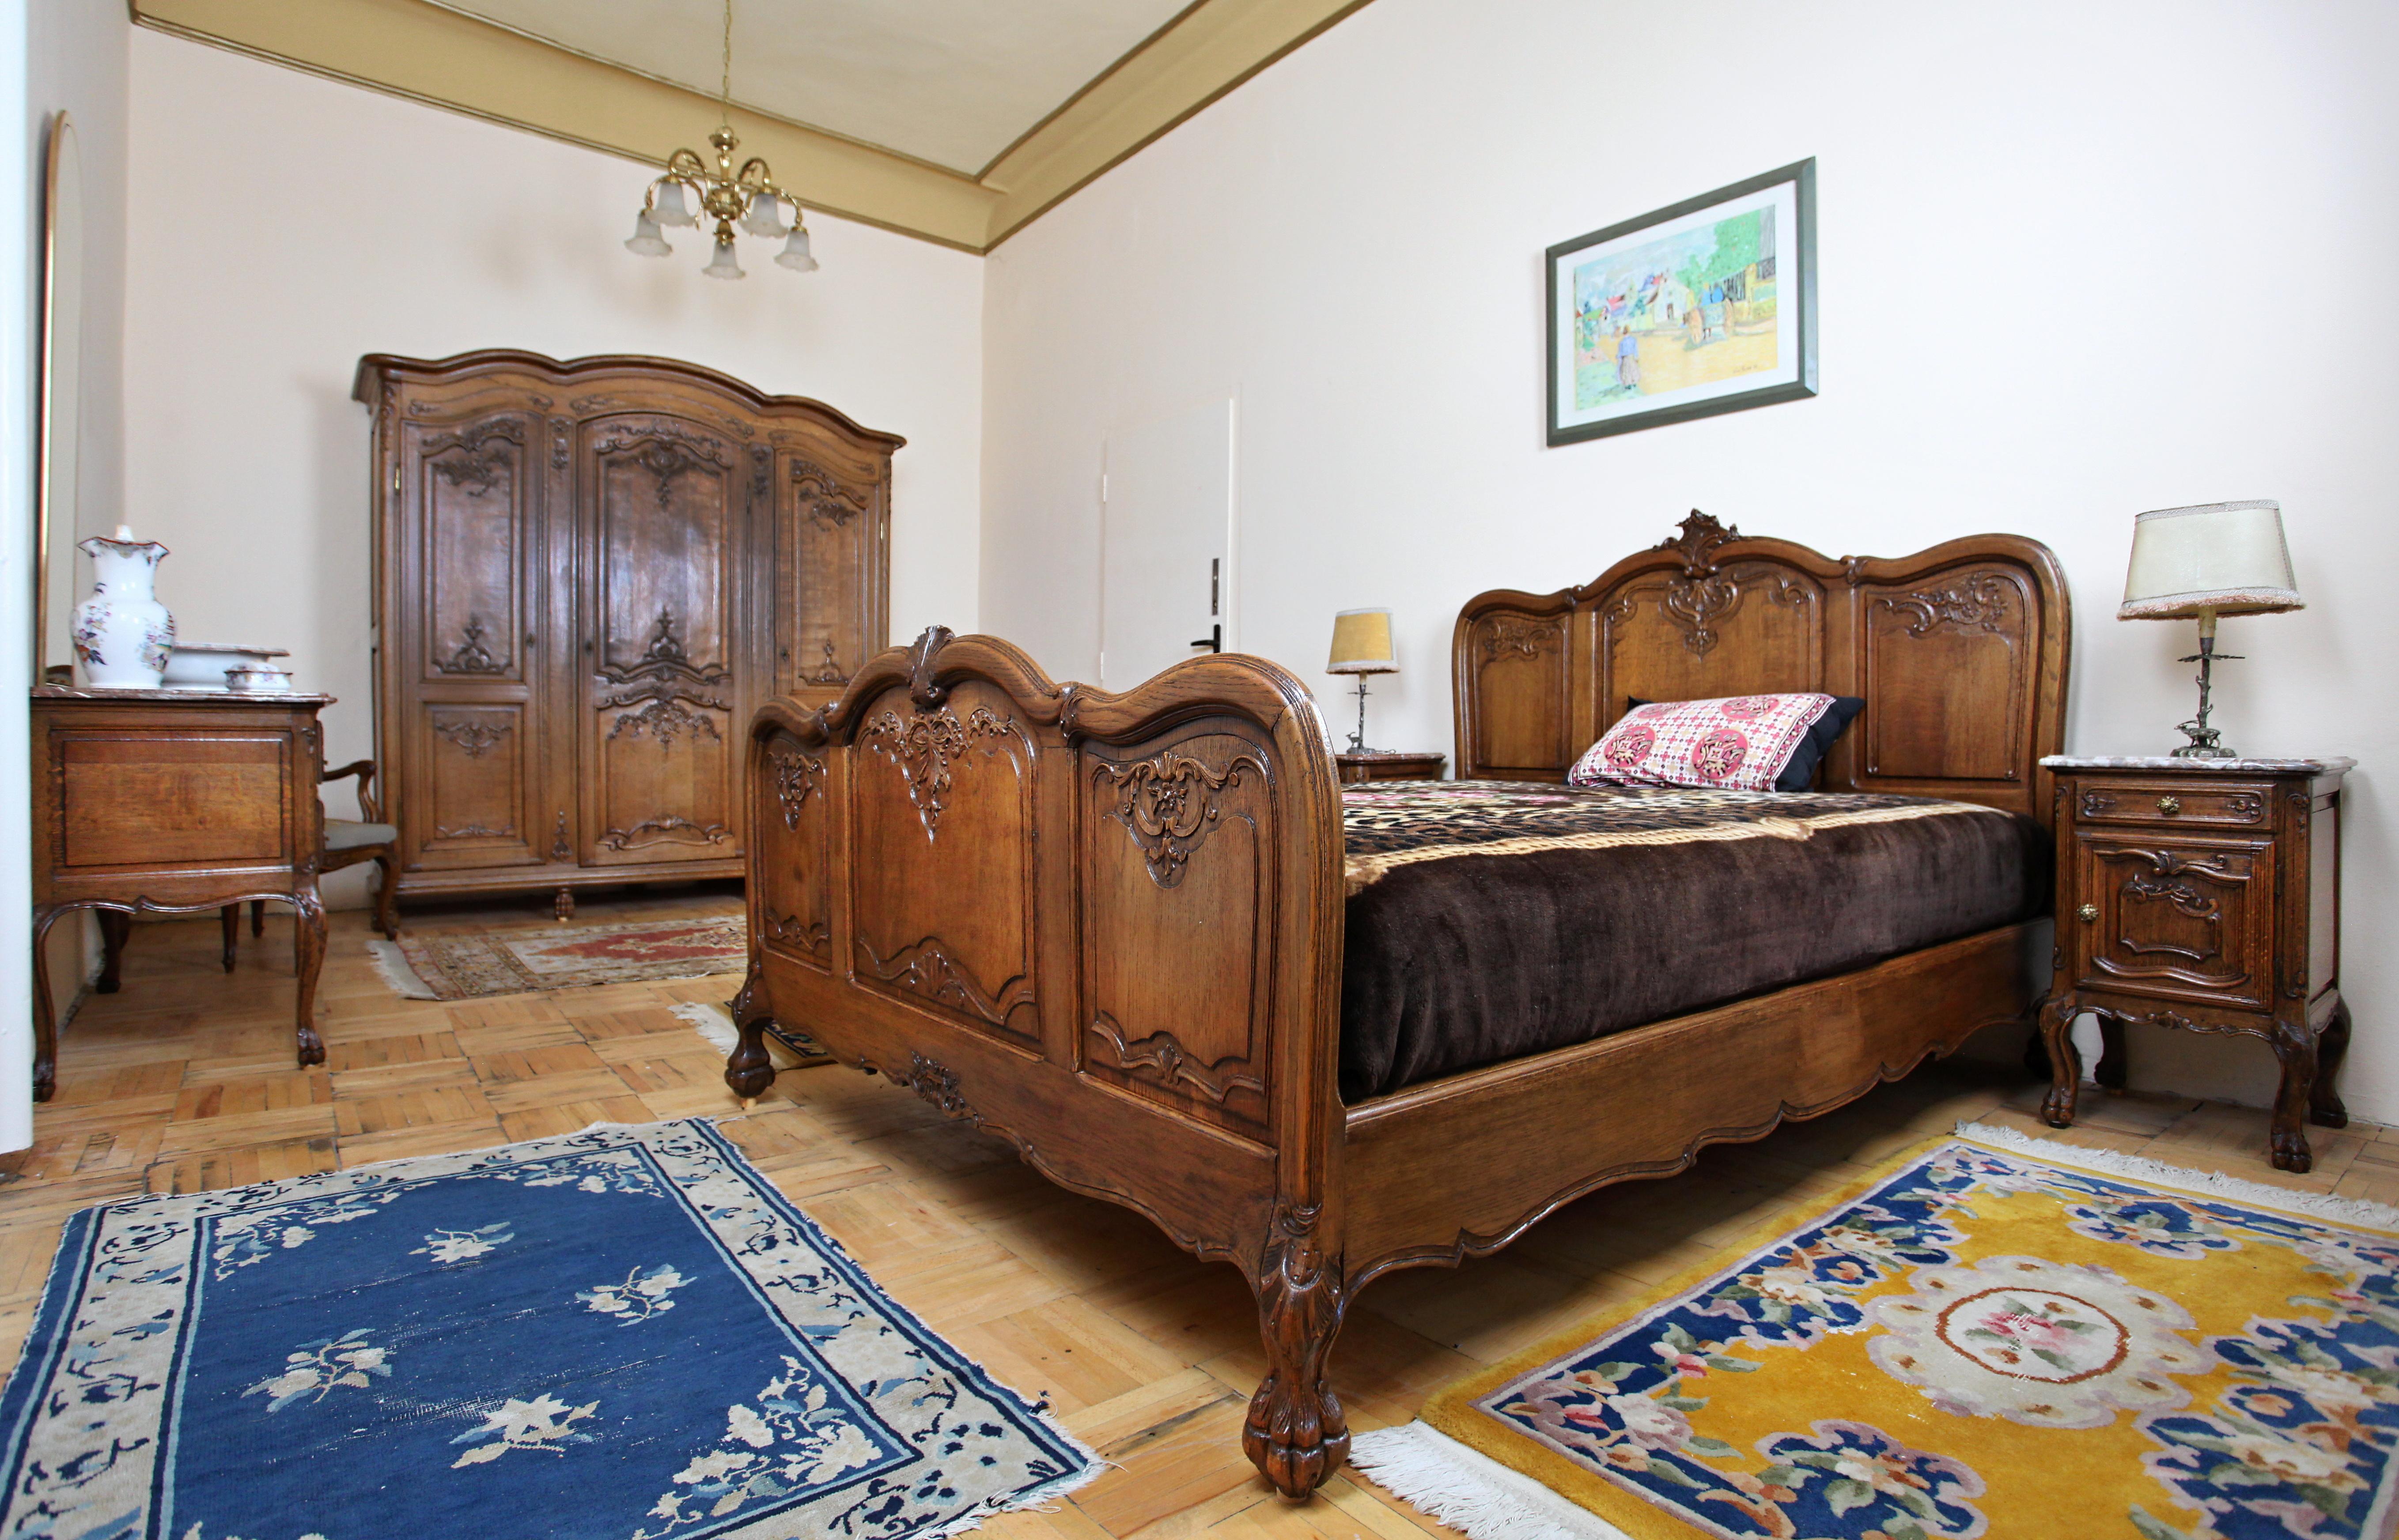 A richly carved antique bedroom. Solid oak

A bedroom from the end of the 19th century decorated with rich carvings in the Rococo style. A beautiful bedroom in excellent quality both in terms of craftsmanship and material. Hand carvings are very